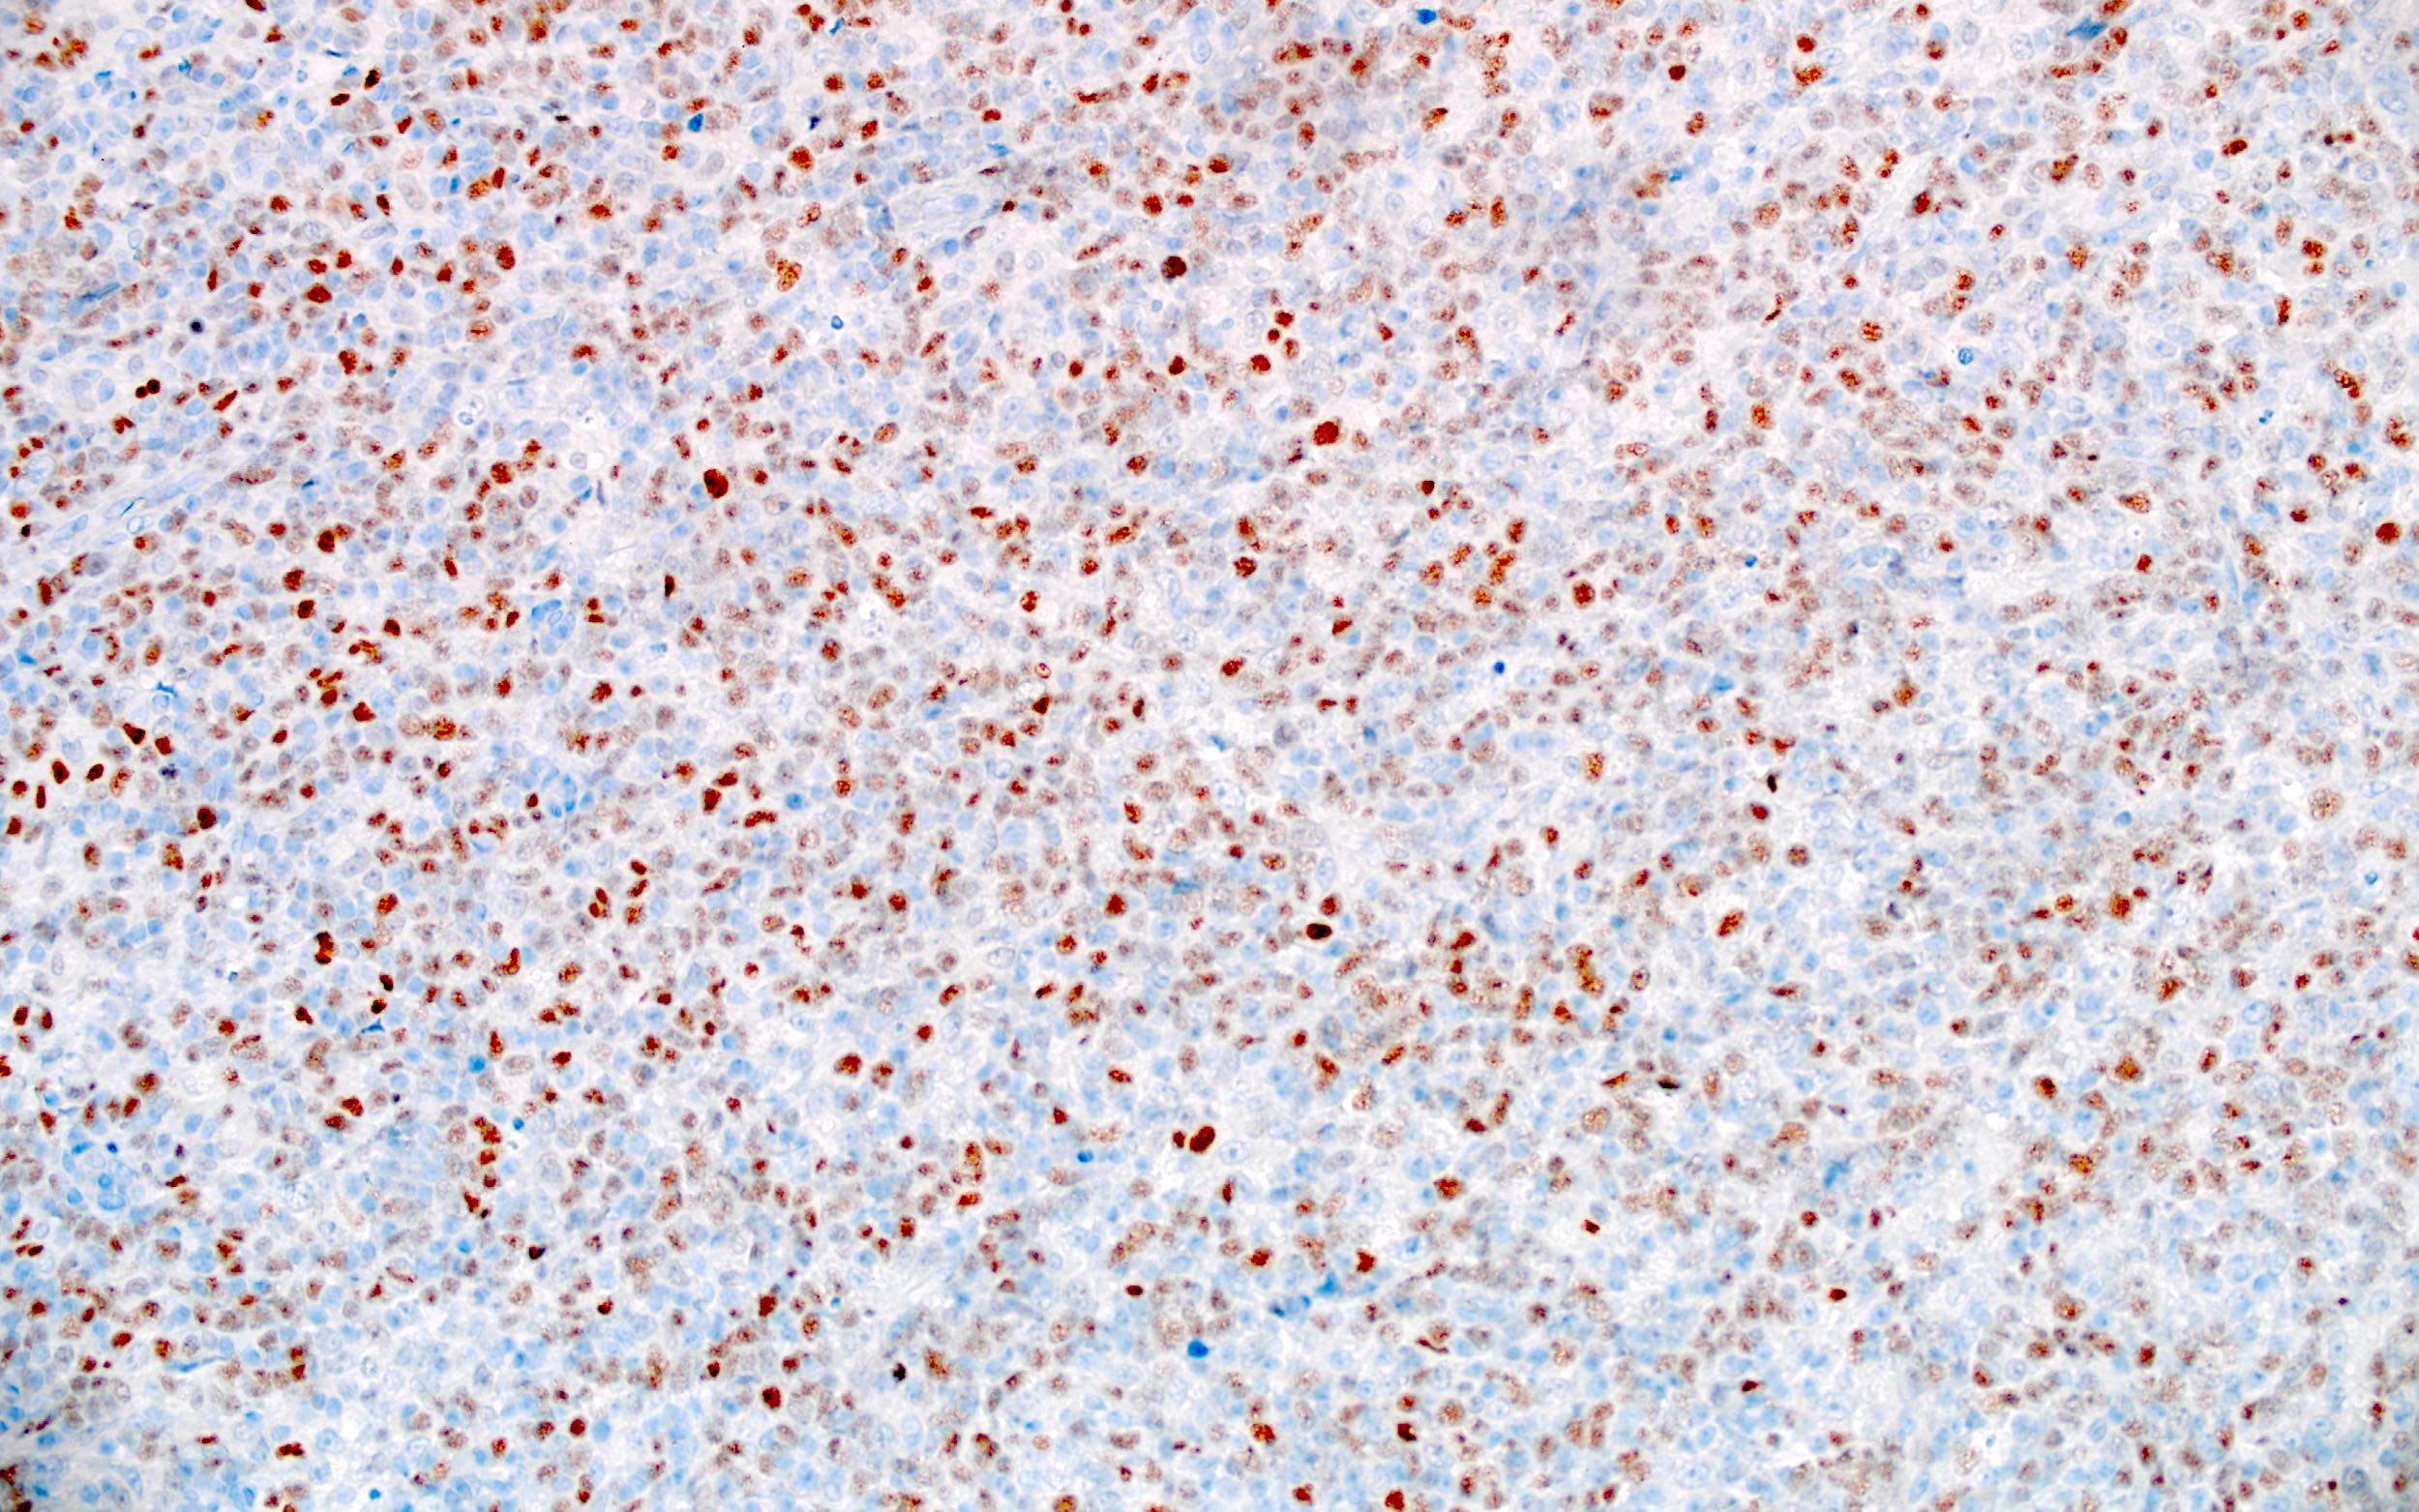 Large atypical cells of DLBCL, BCL6+